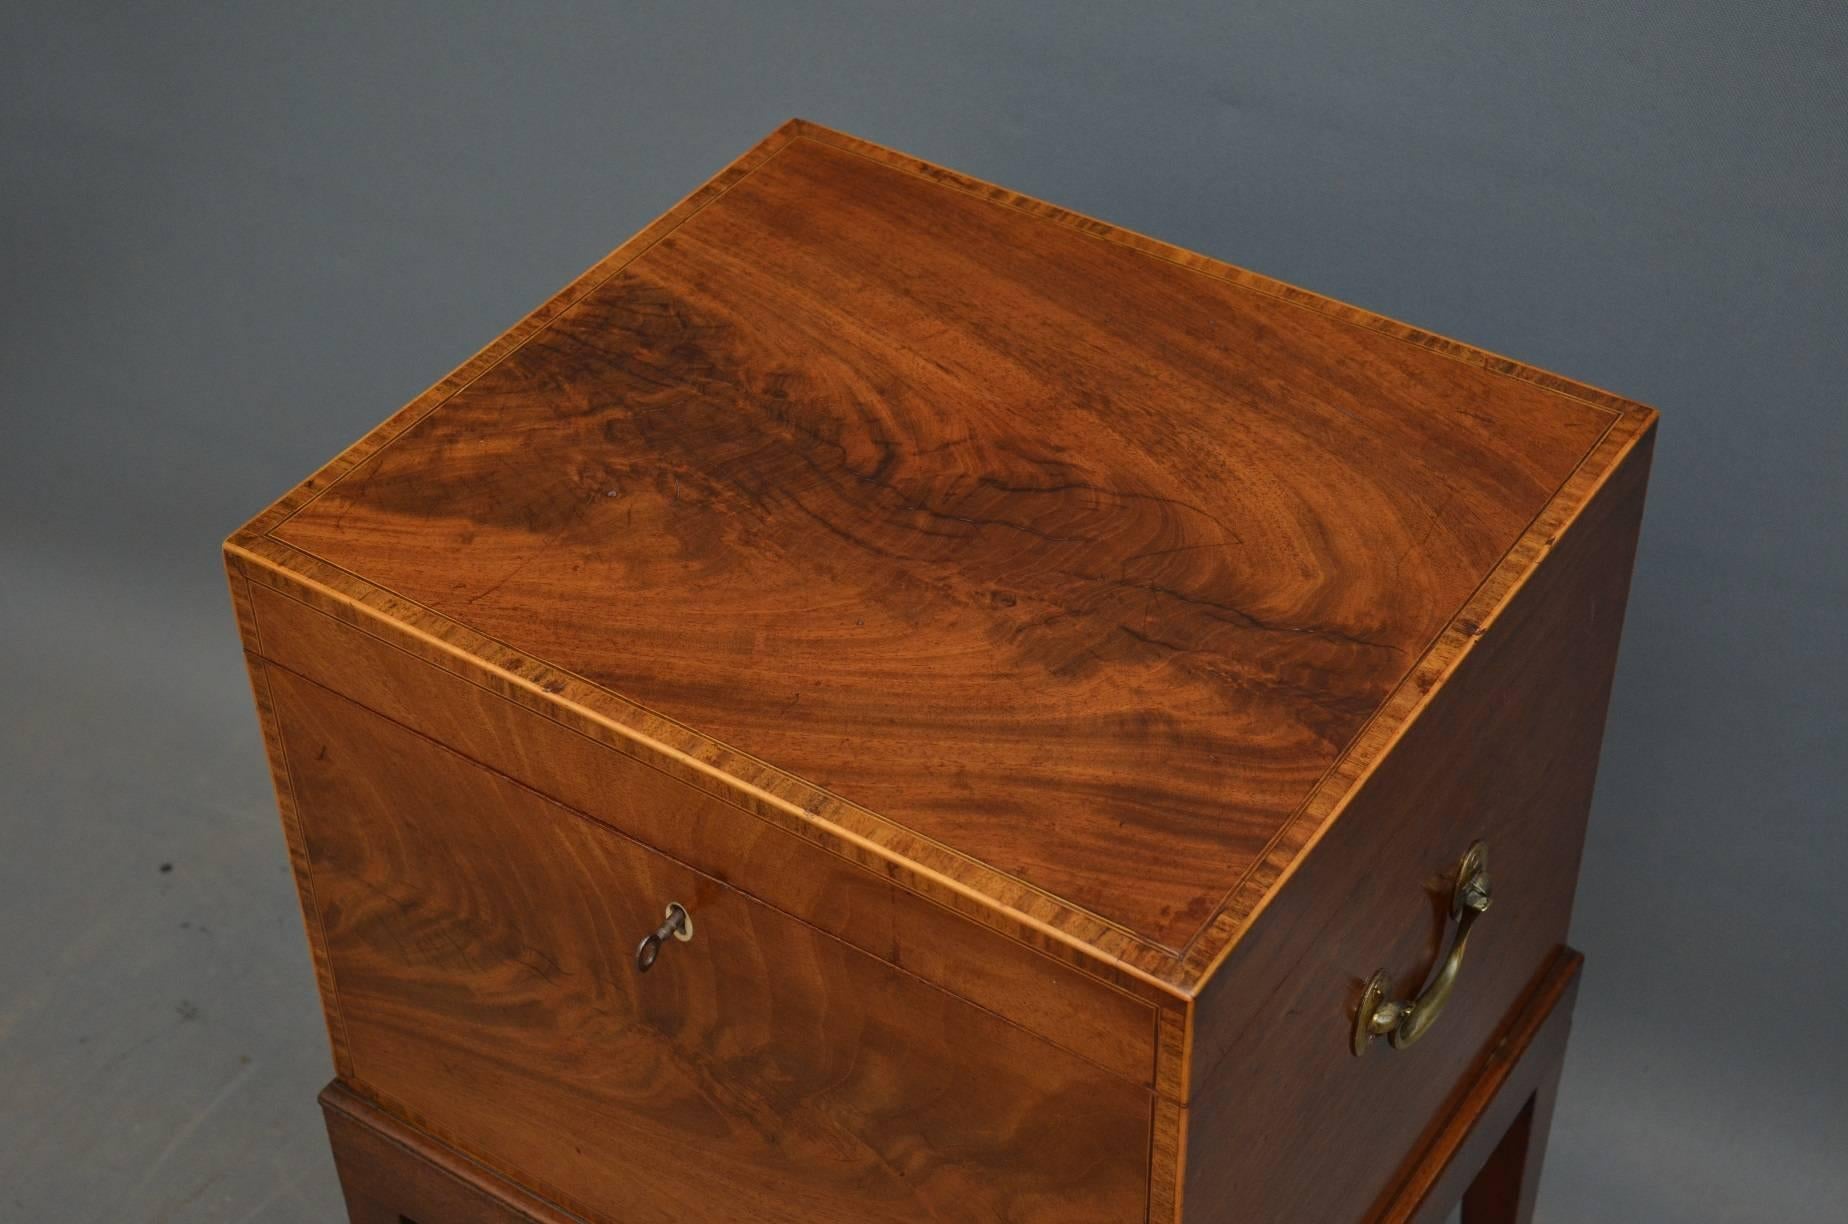 Sn4136 fine George III mahogany cellaret, having cross bended top which open to reveal bottles compartments, flanked by brass carrying handles, all standing on tapered legs terminating in brass castors, all in wonderful condition throughout, circa